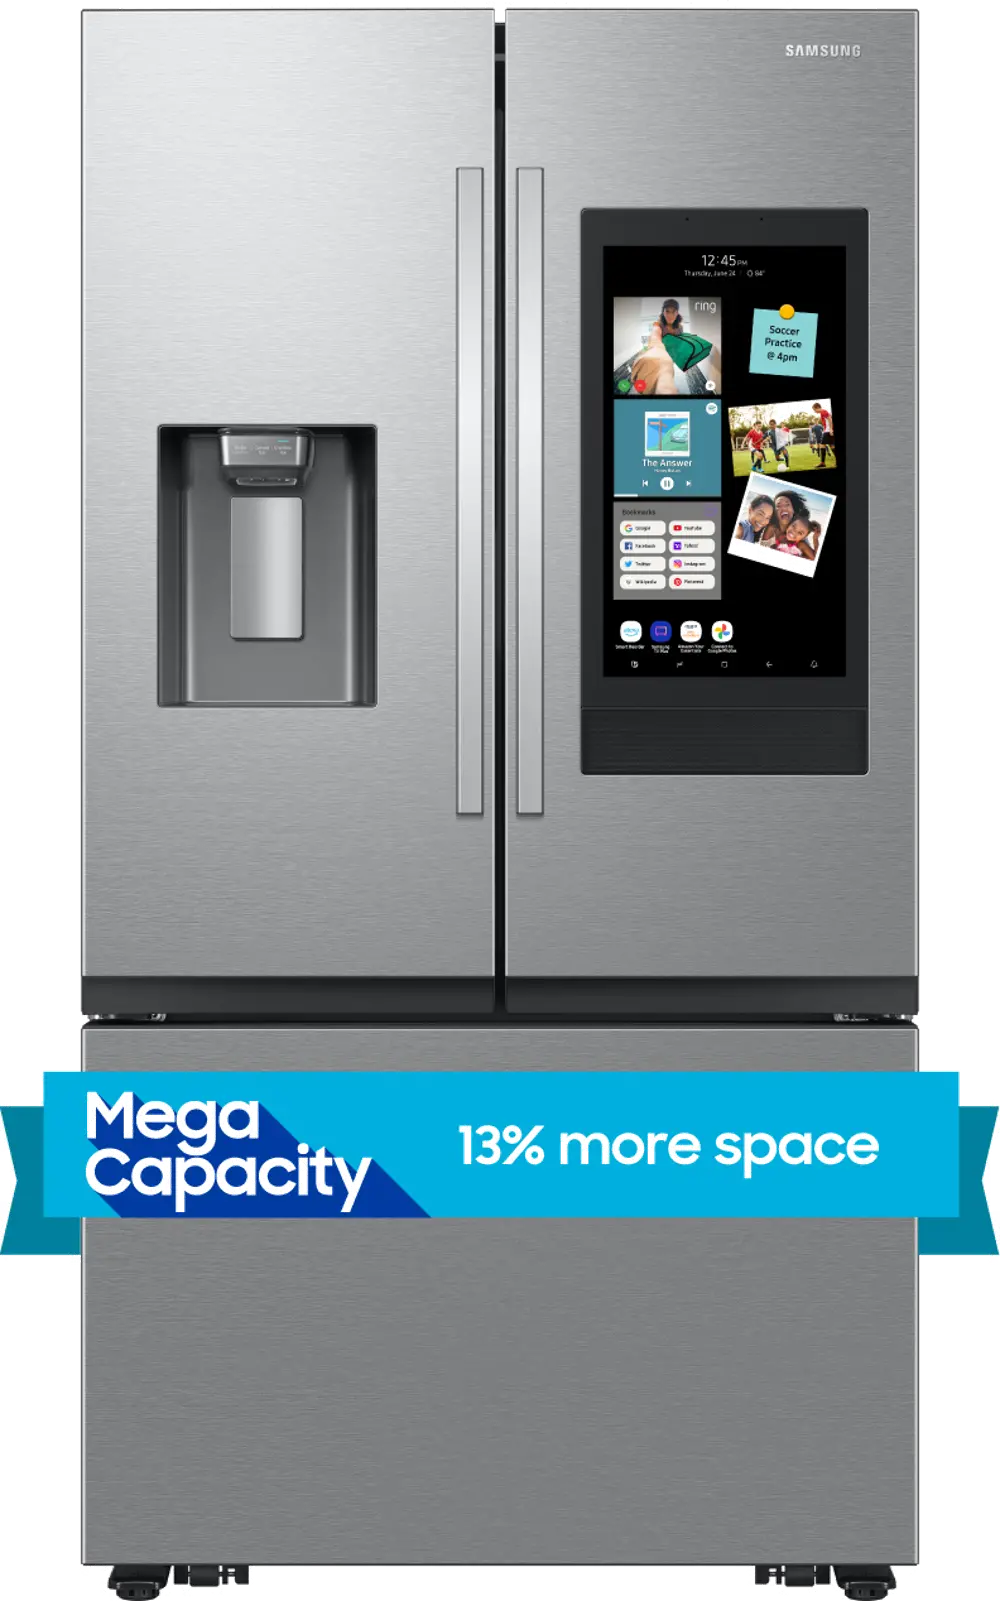 RF32CG5900SR Samsung 30 Cu Ft Mega Capacity French Door Refrigerator with Family Hub - Stainless Steel-1